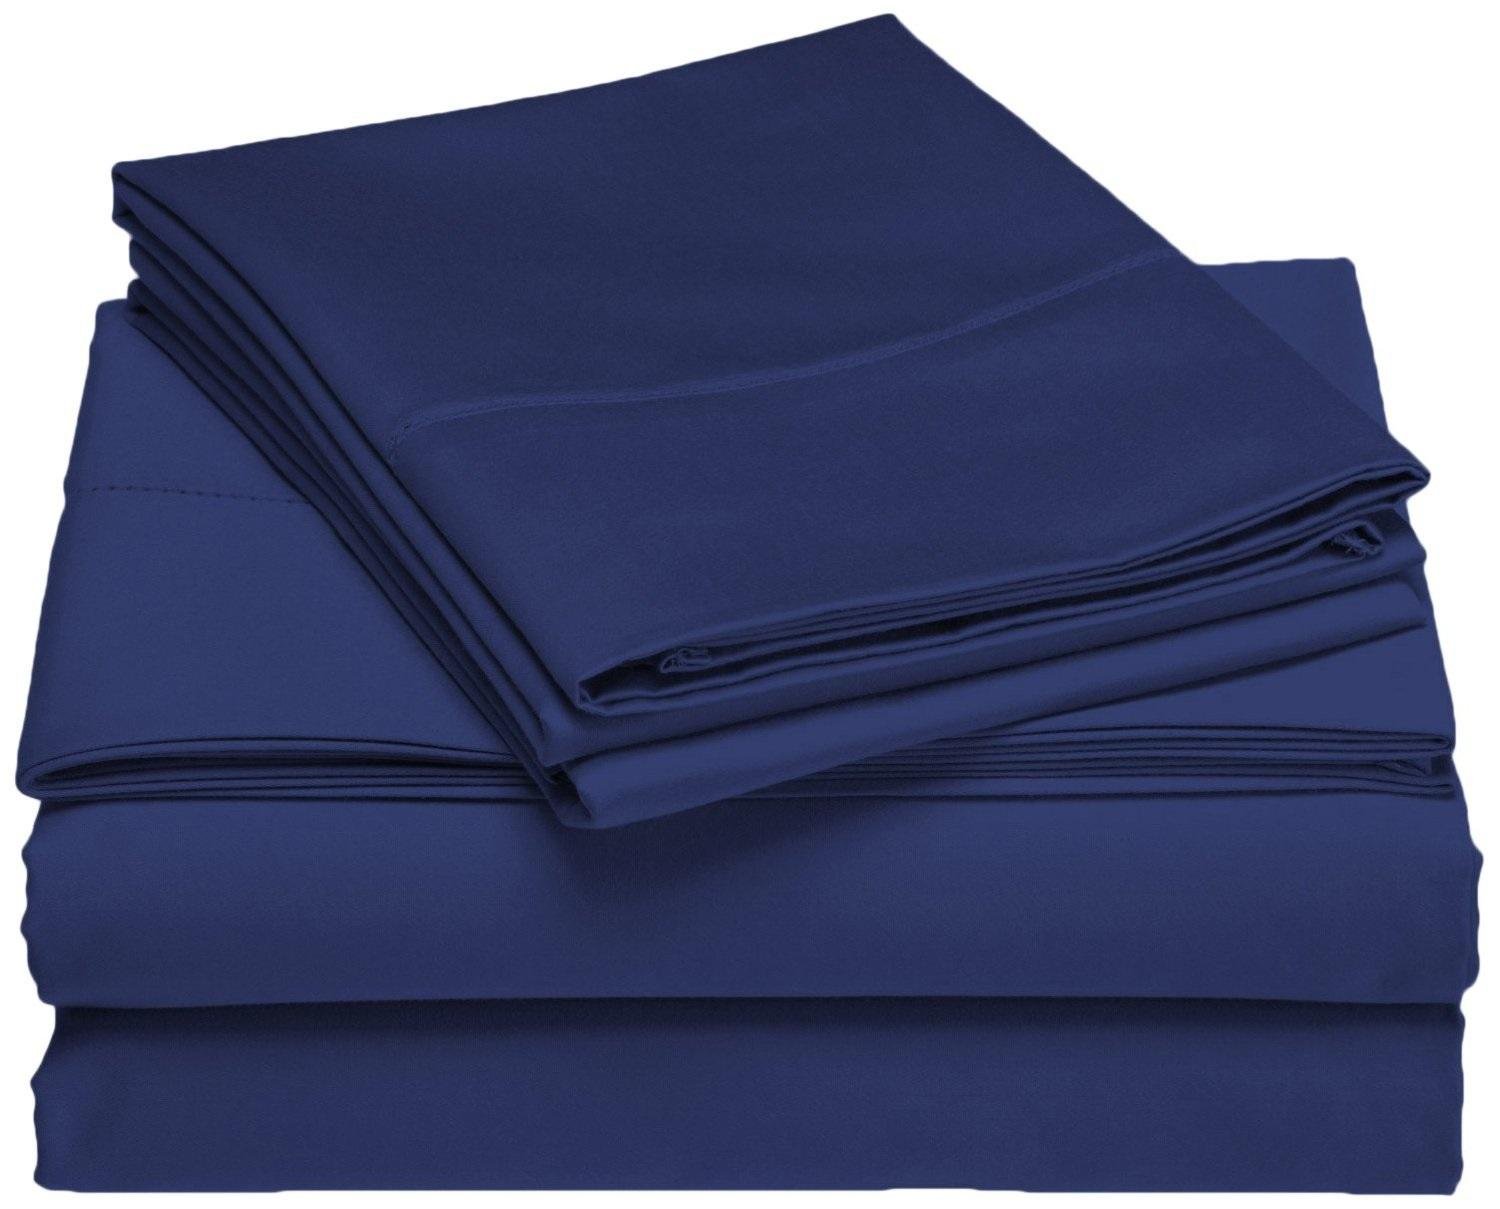 Why are bamboo sheets largely preferred?